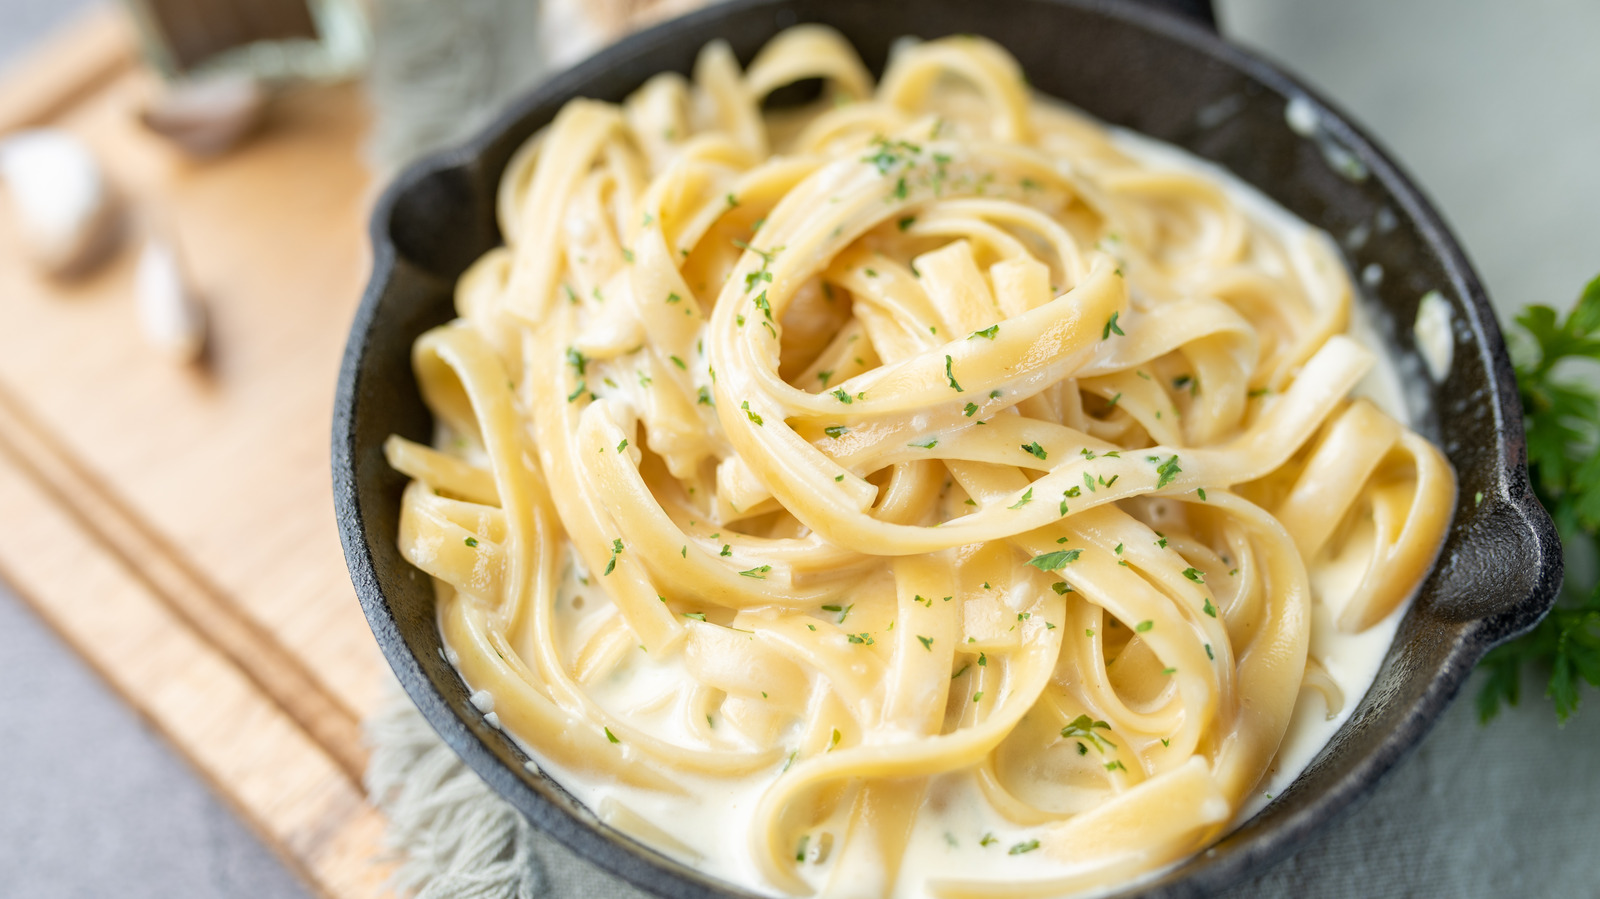 16 Common Mistakes Everyone Makes With Alfredo Sauce – Tasting Table